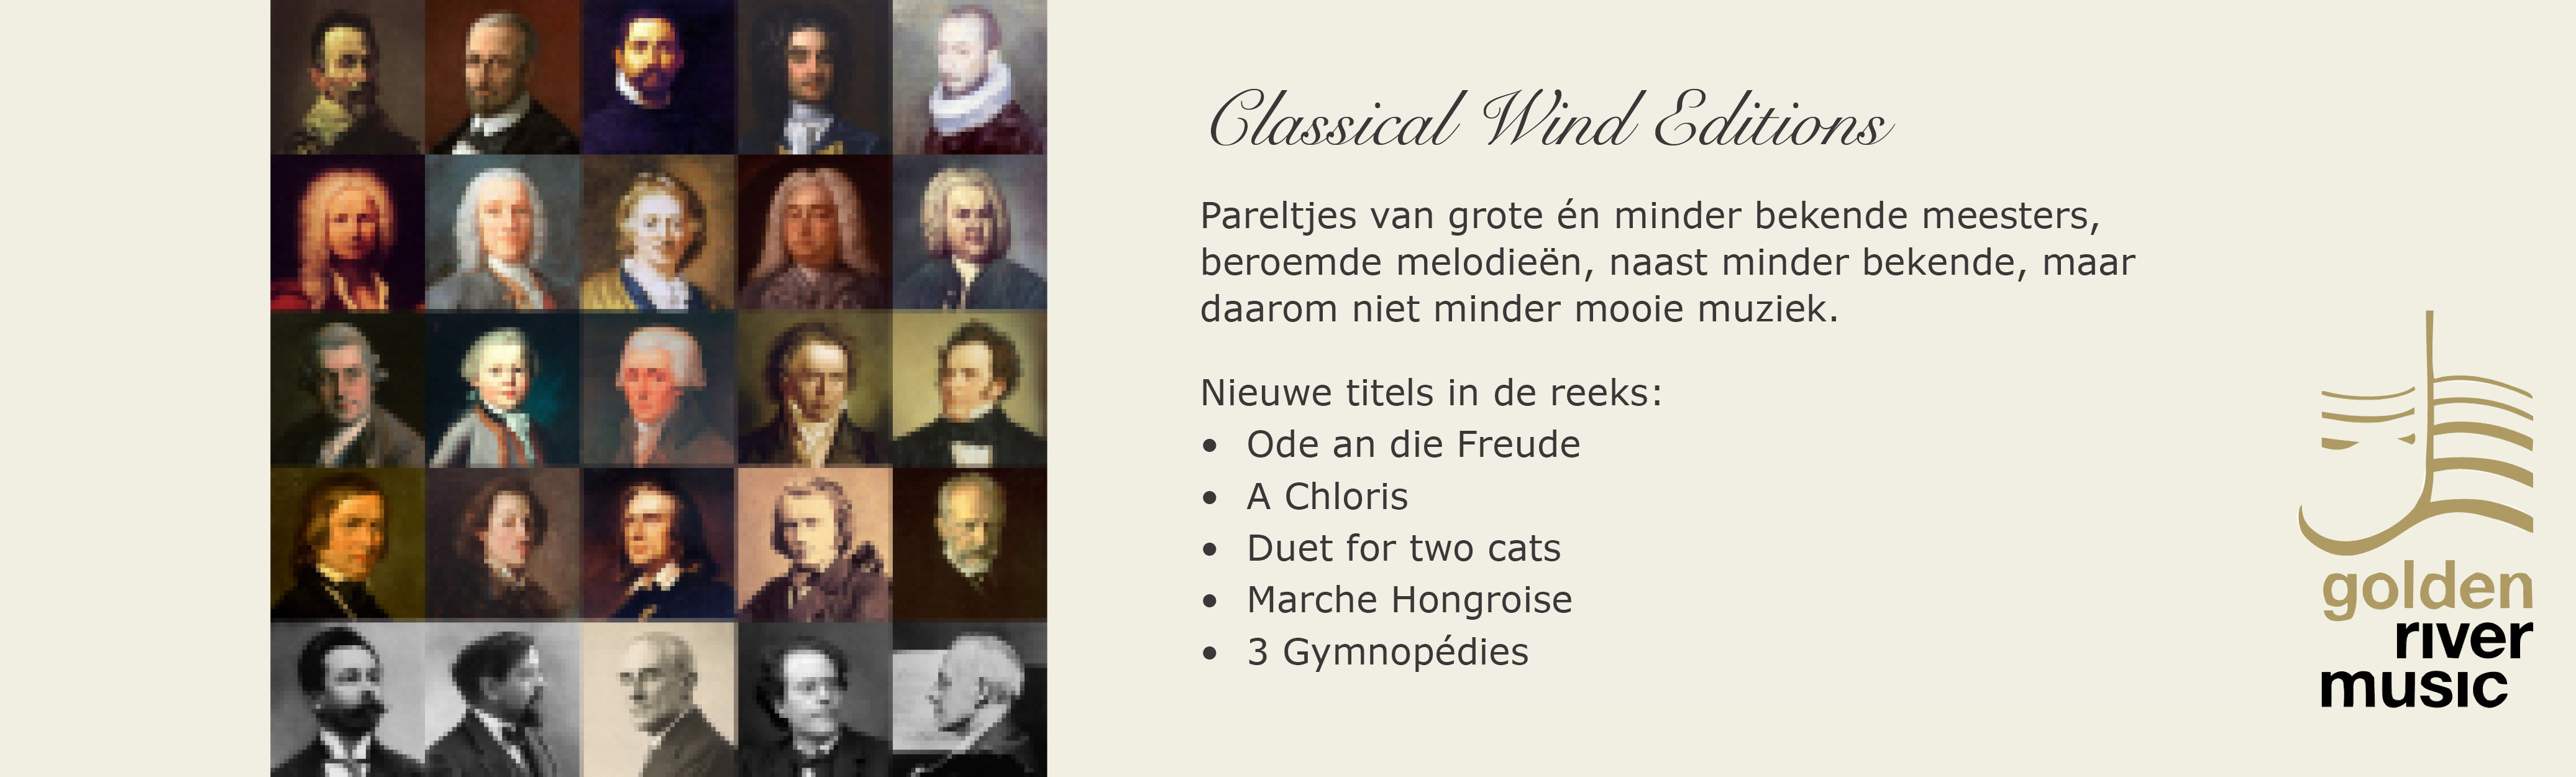 Classical Wind Editions NL Finaal